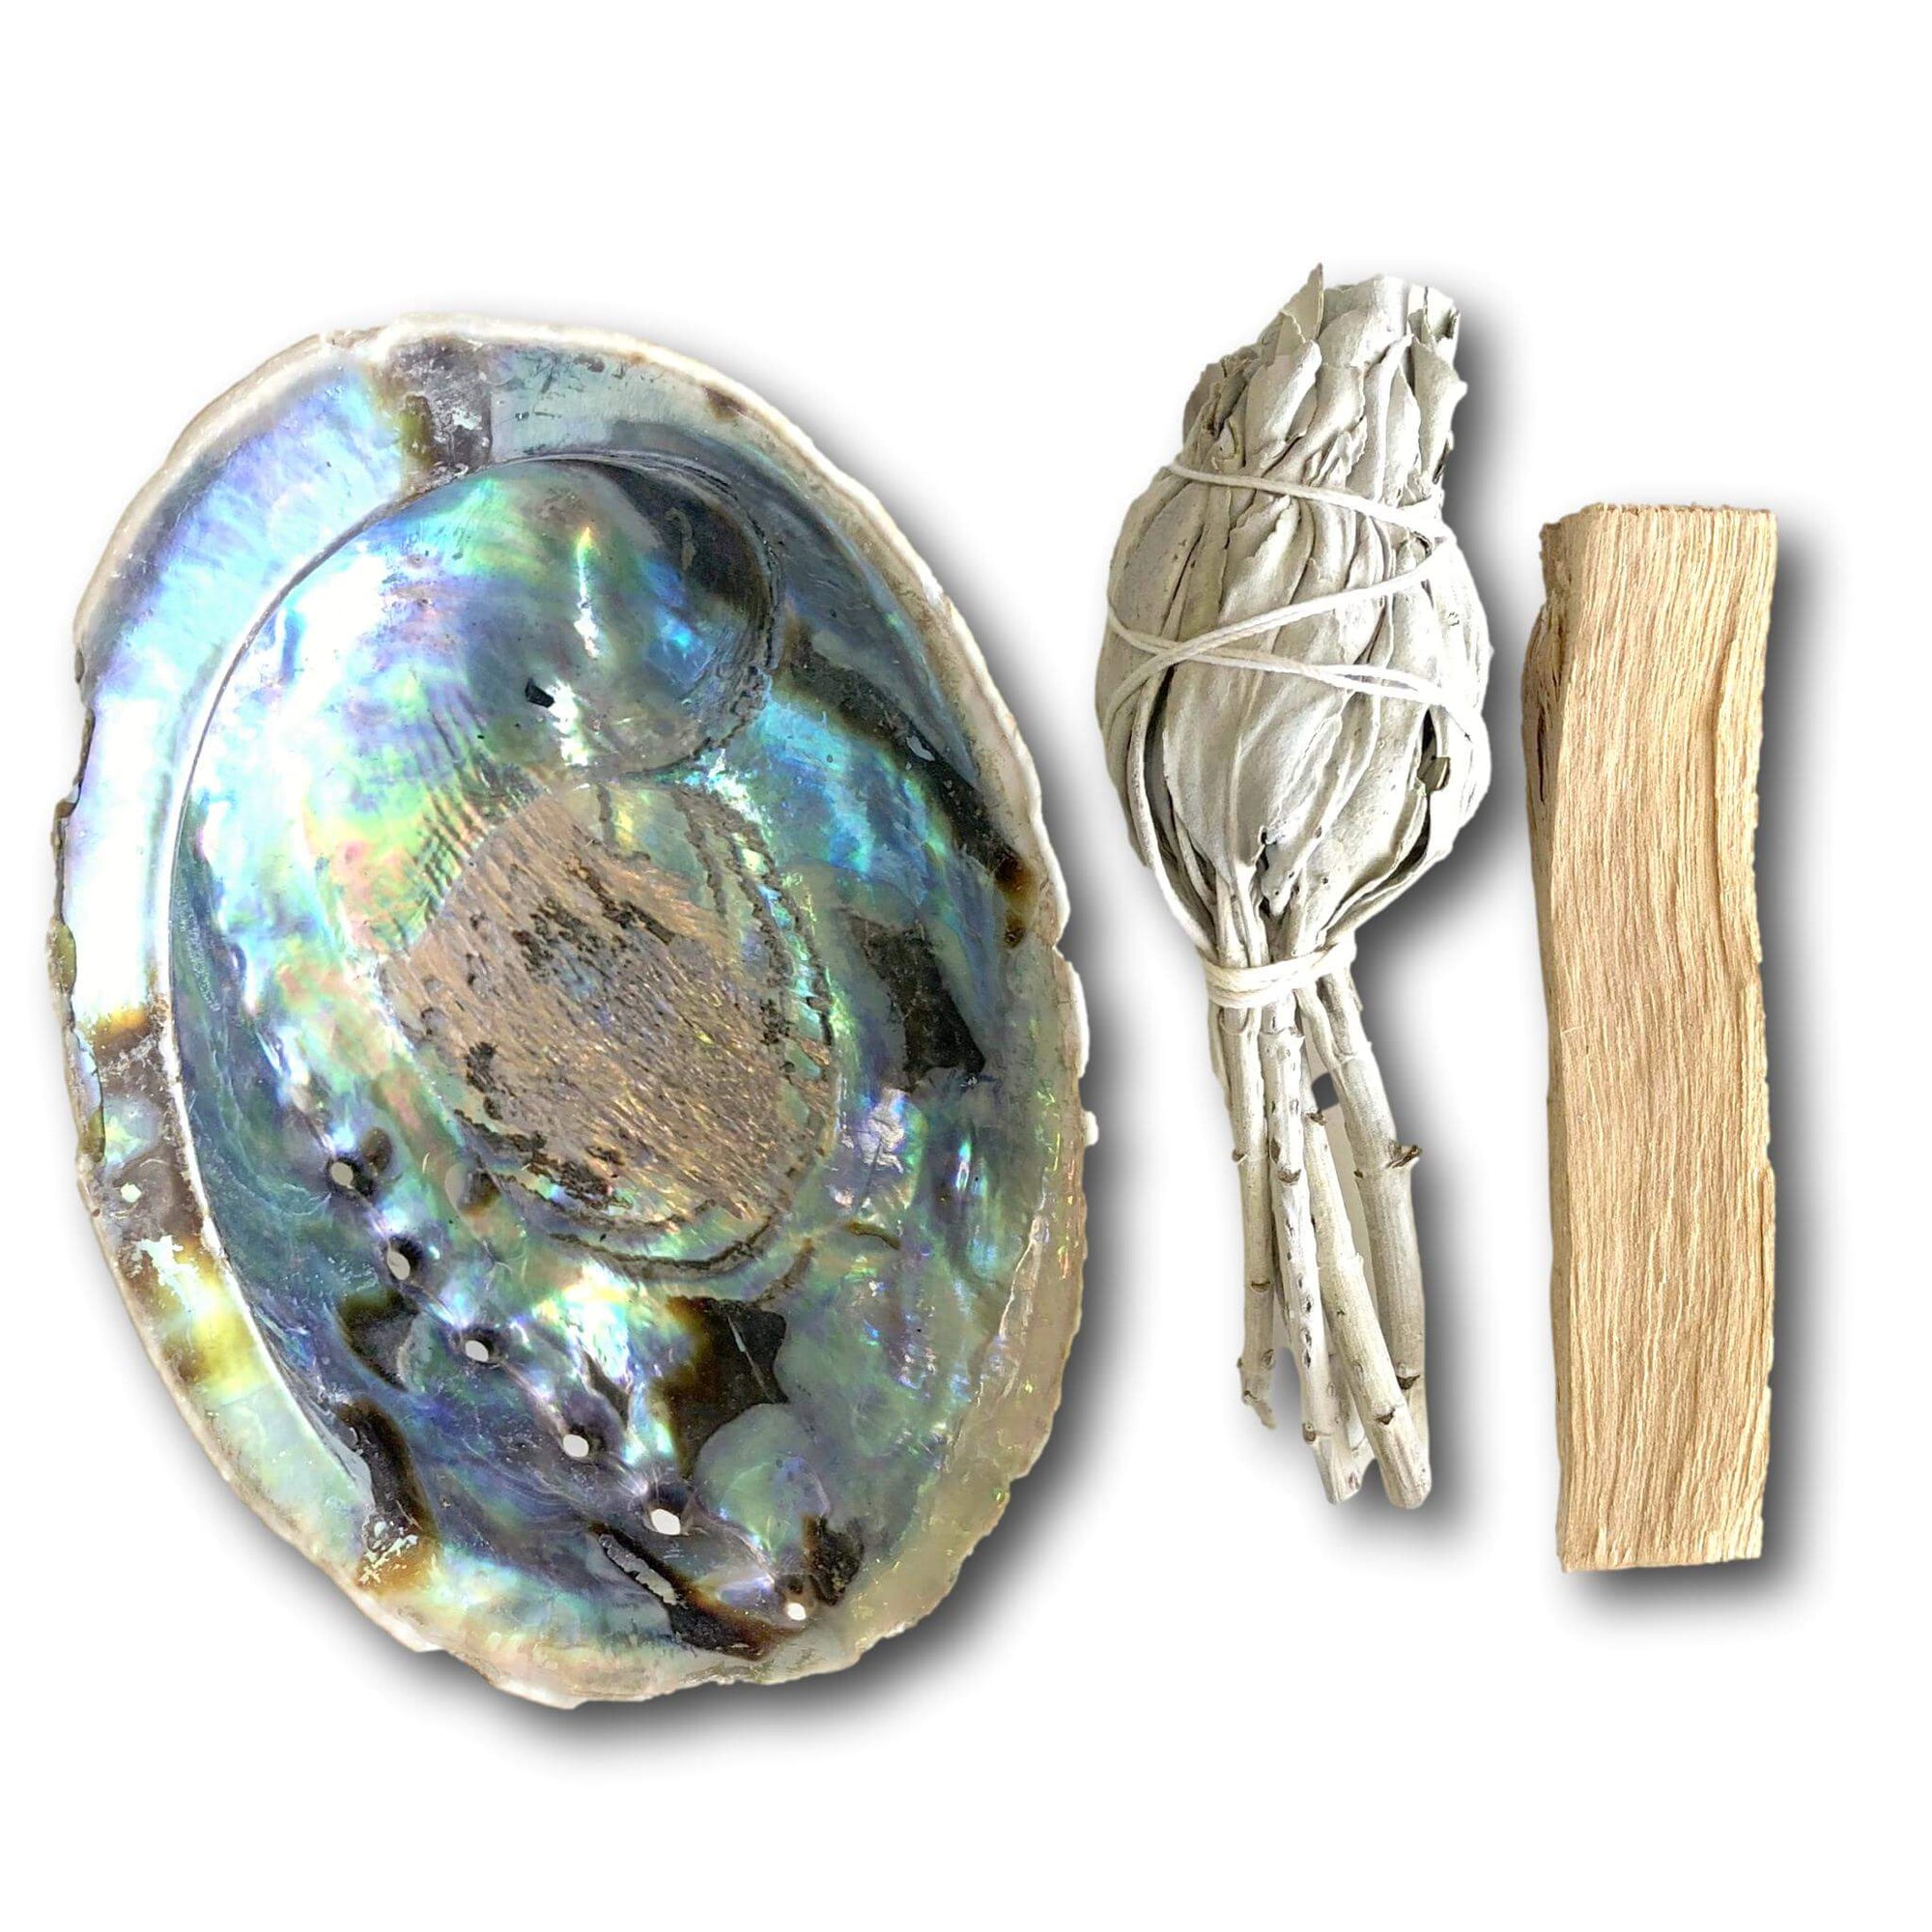 White Sage, Palo Santo With Shell Smudge Kit - Positive energy & Clearing Of Negative Energy